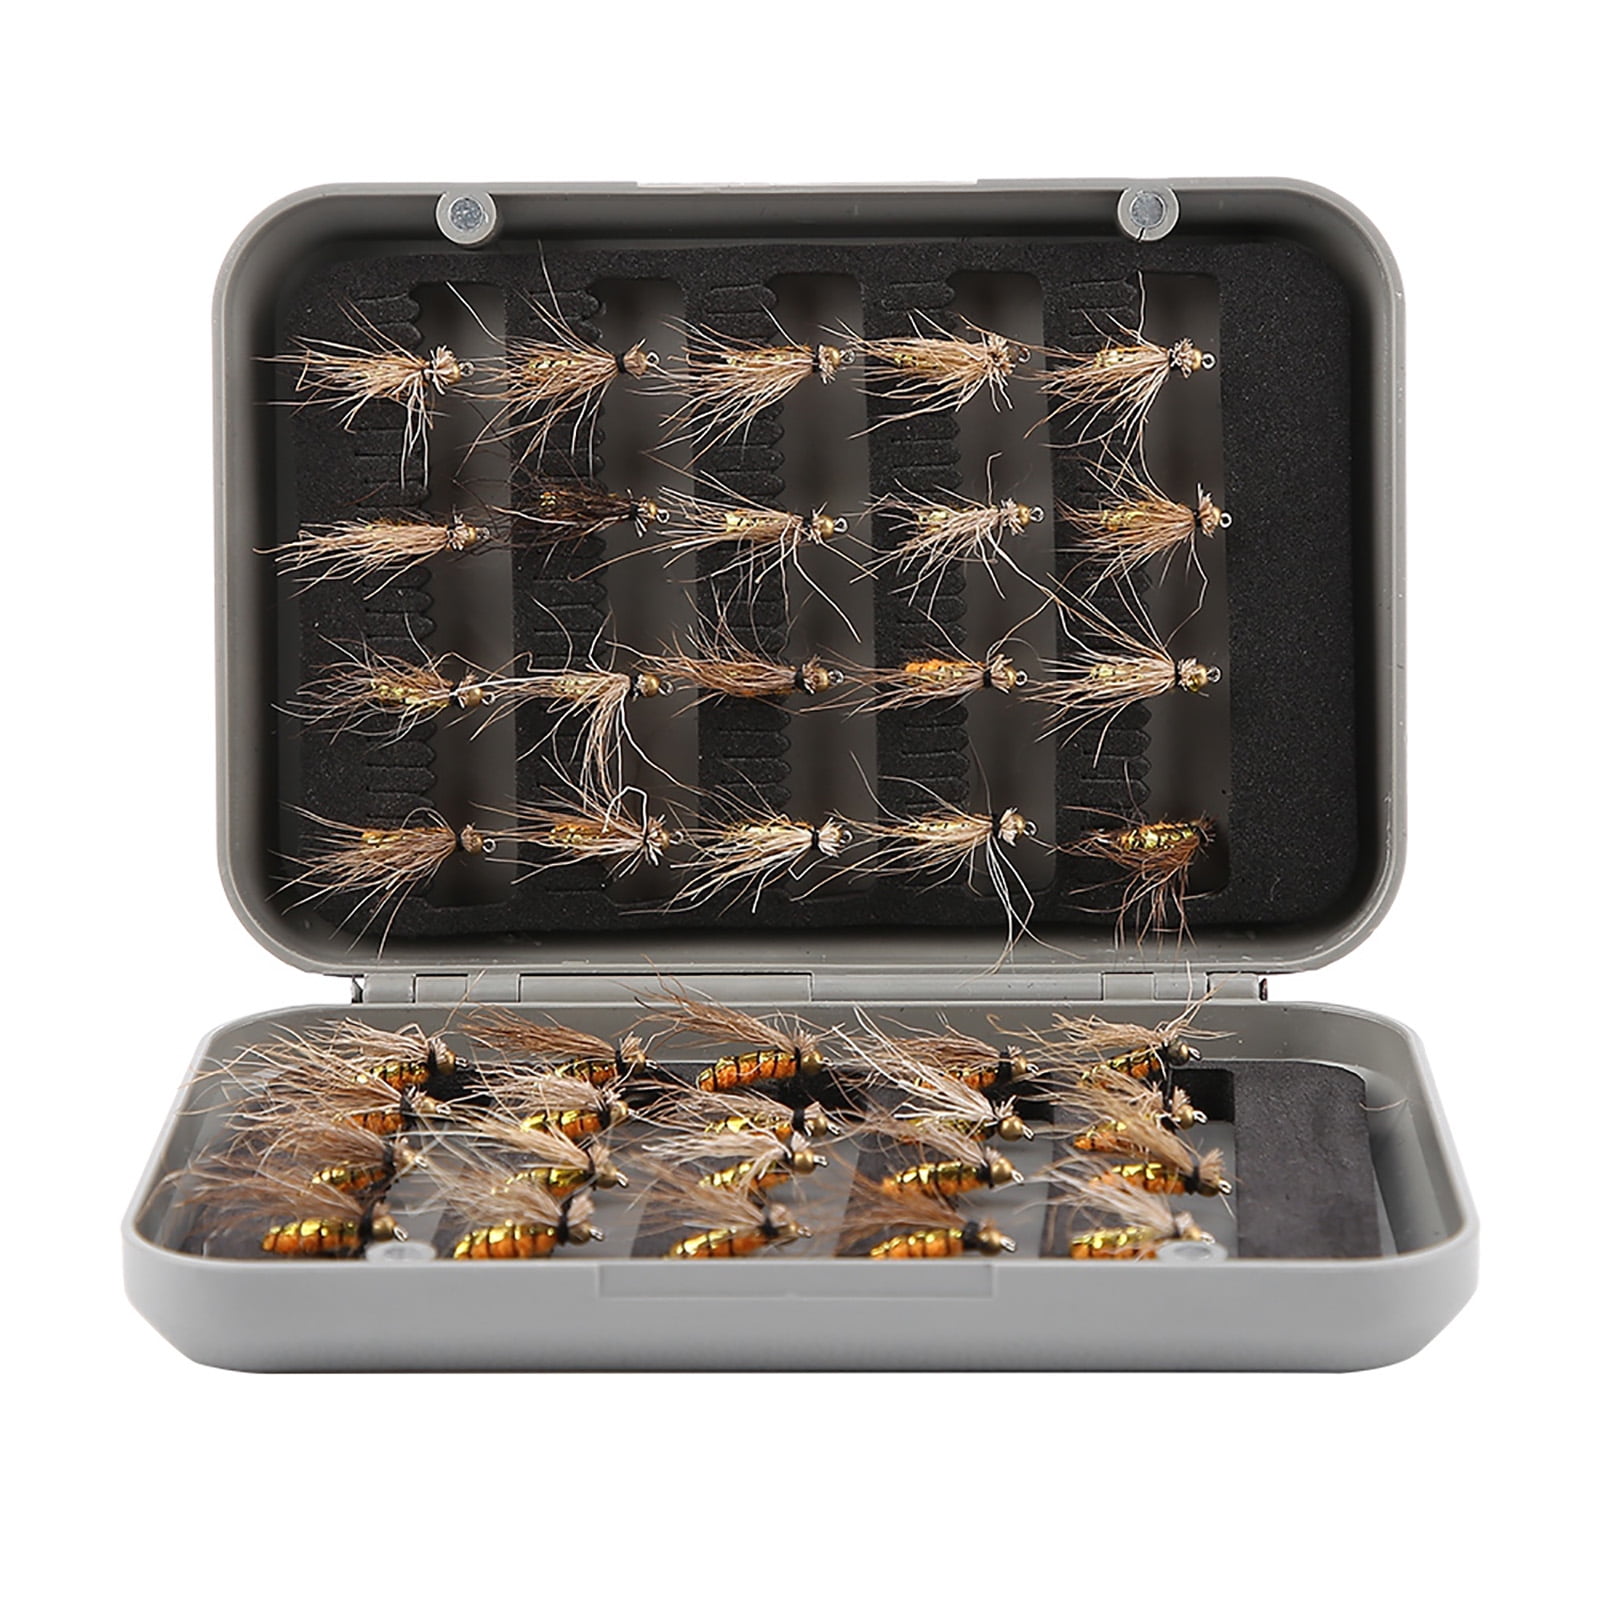 Mosquito Fishing Lure 40pcs Mosquito Fly Fishing Lure Set Artificial Insect Fishing Hooks Tackle with Plastic Box 